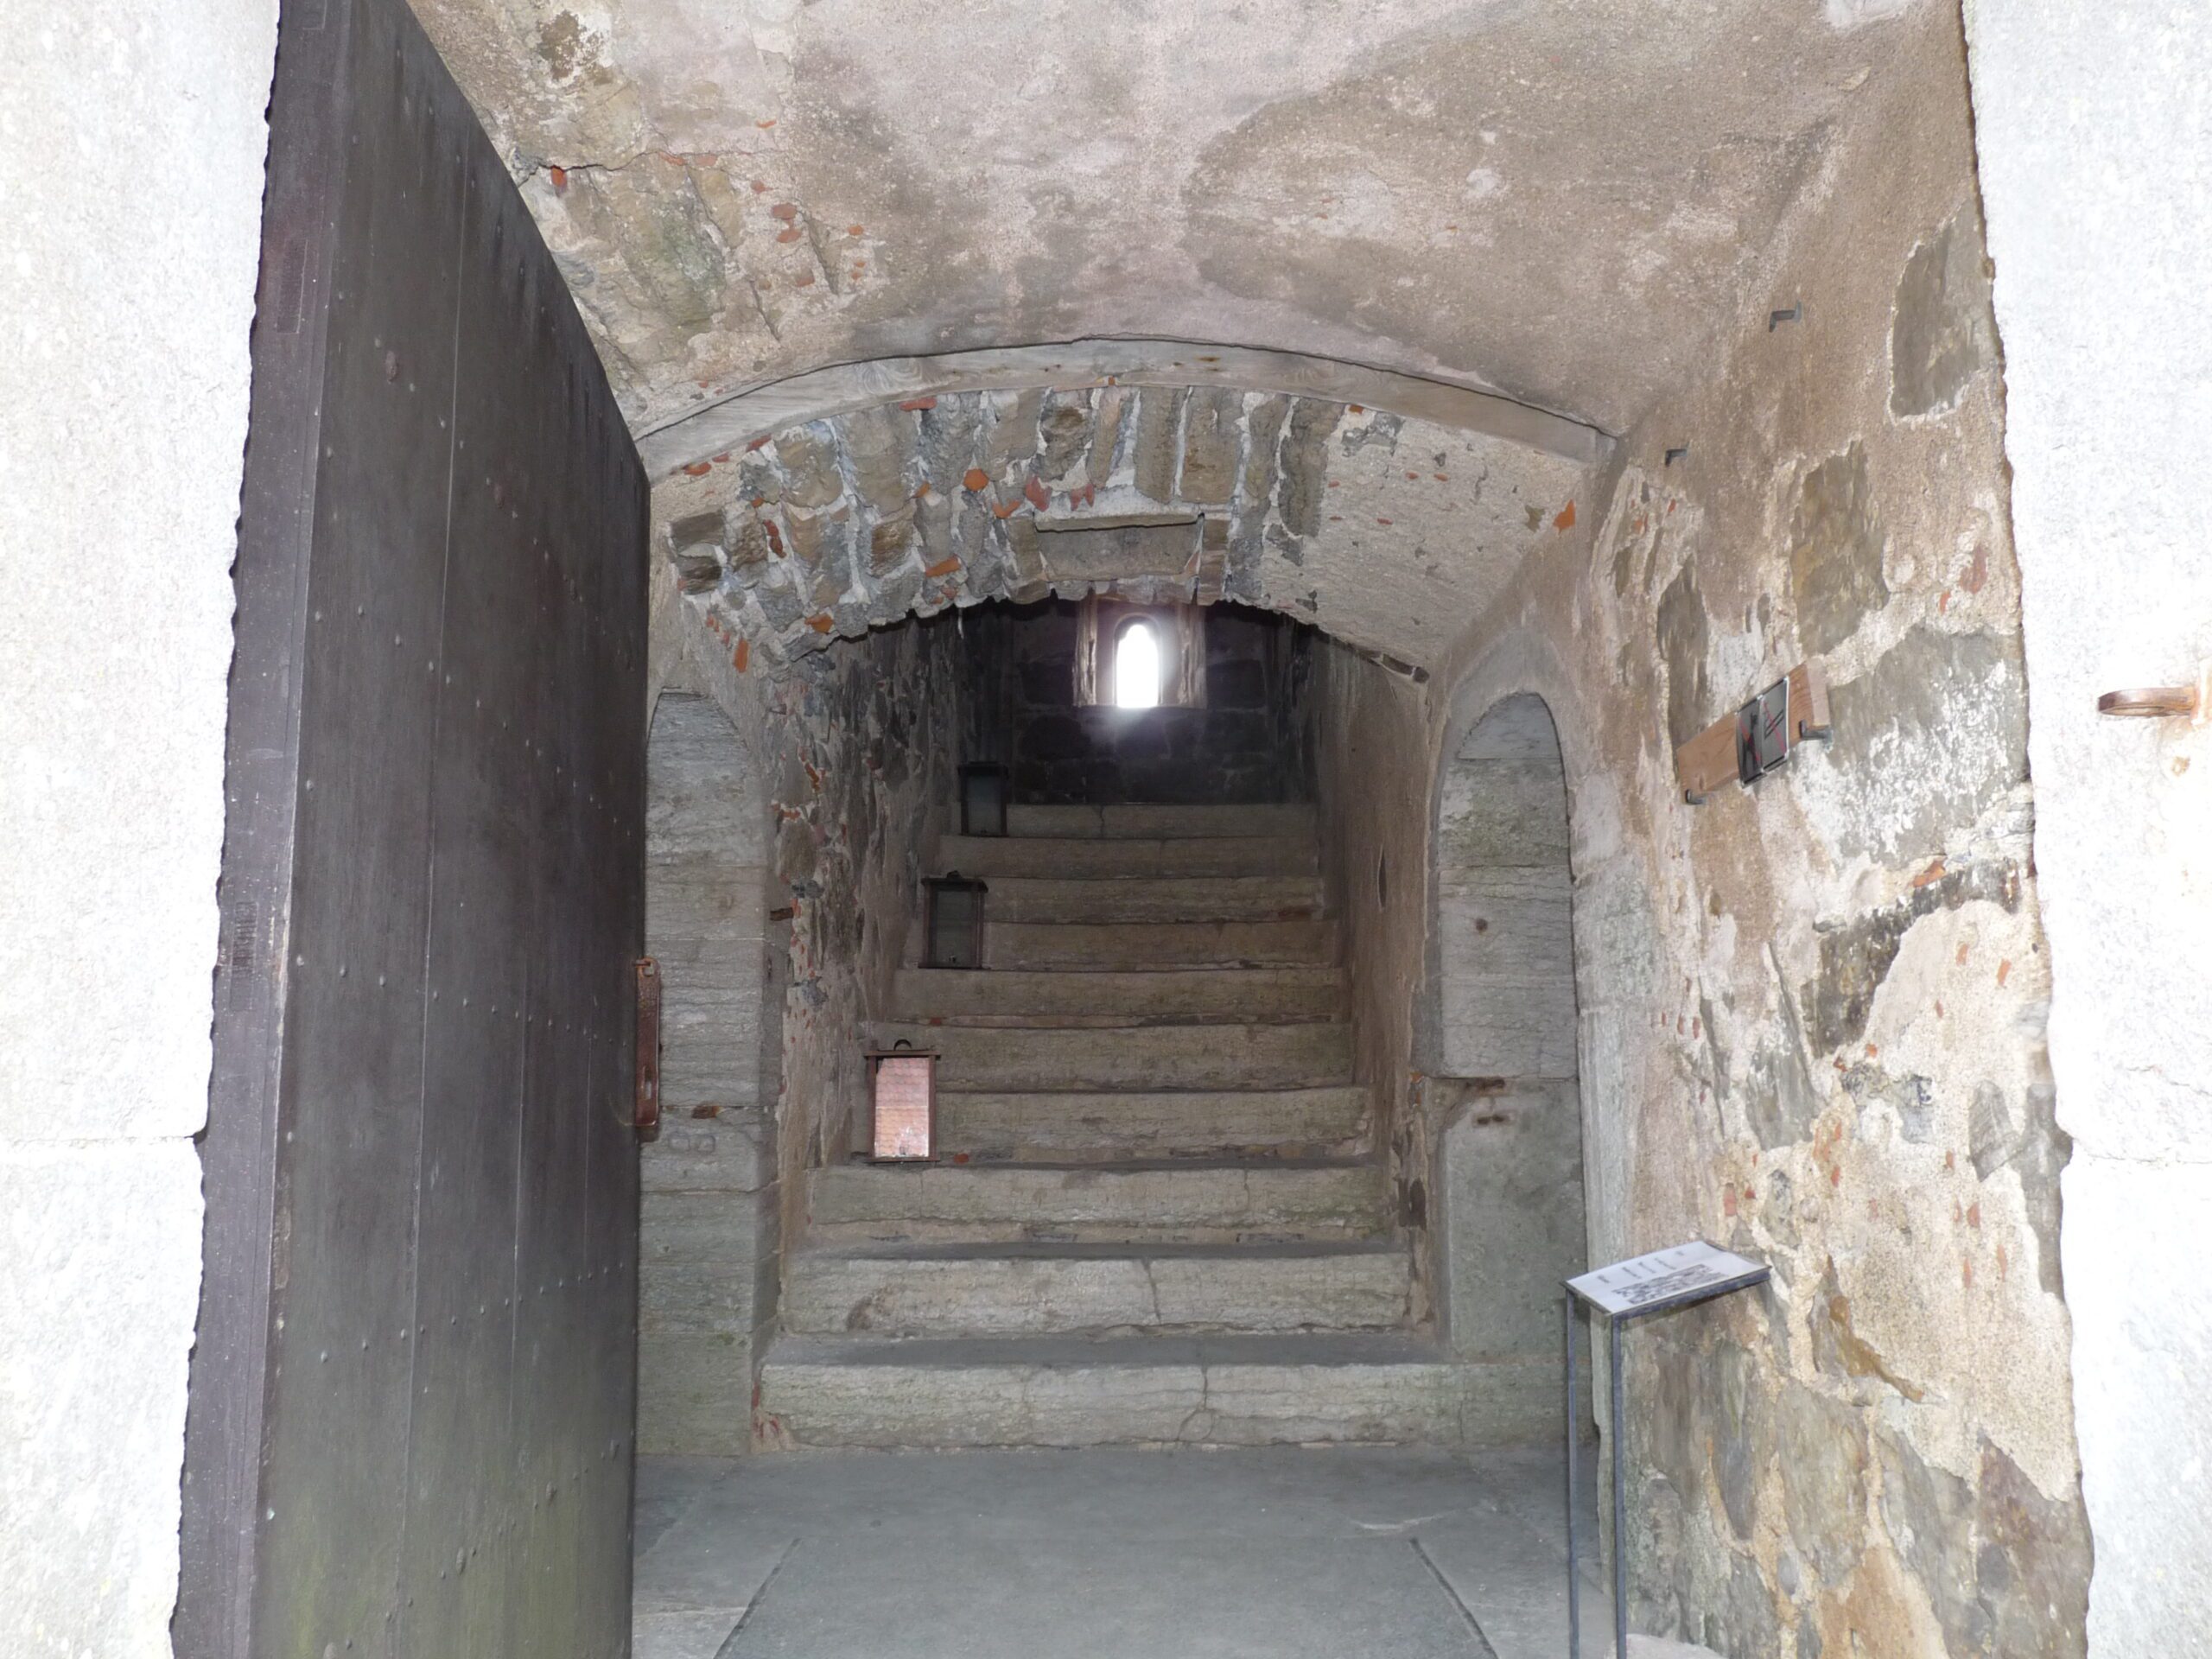 Here you can see the entrance hall with the stairs up to the first floor in the center of the picture. To the left is the opened castle door.